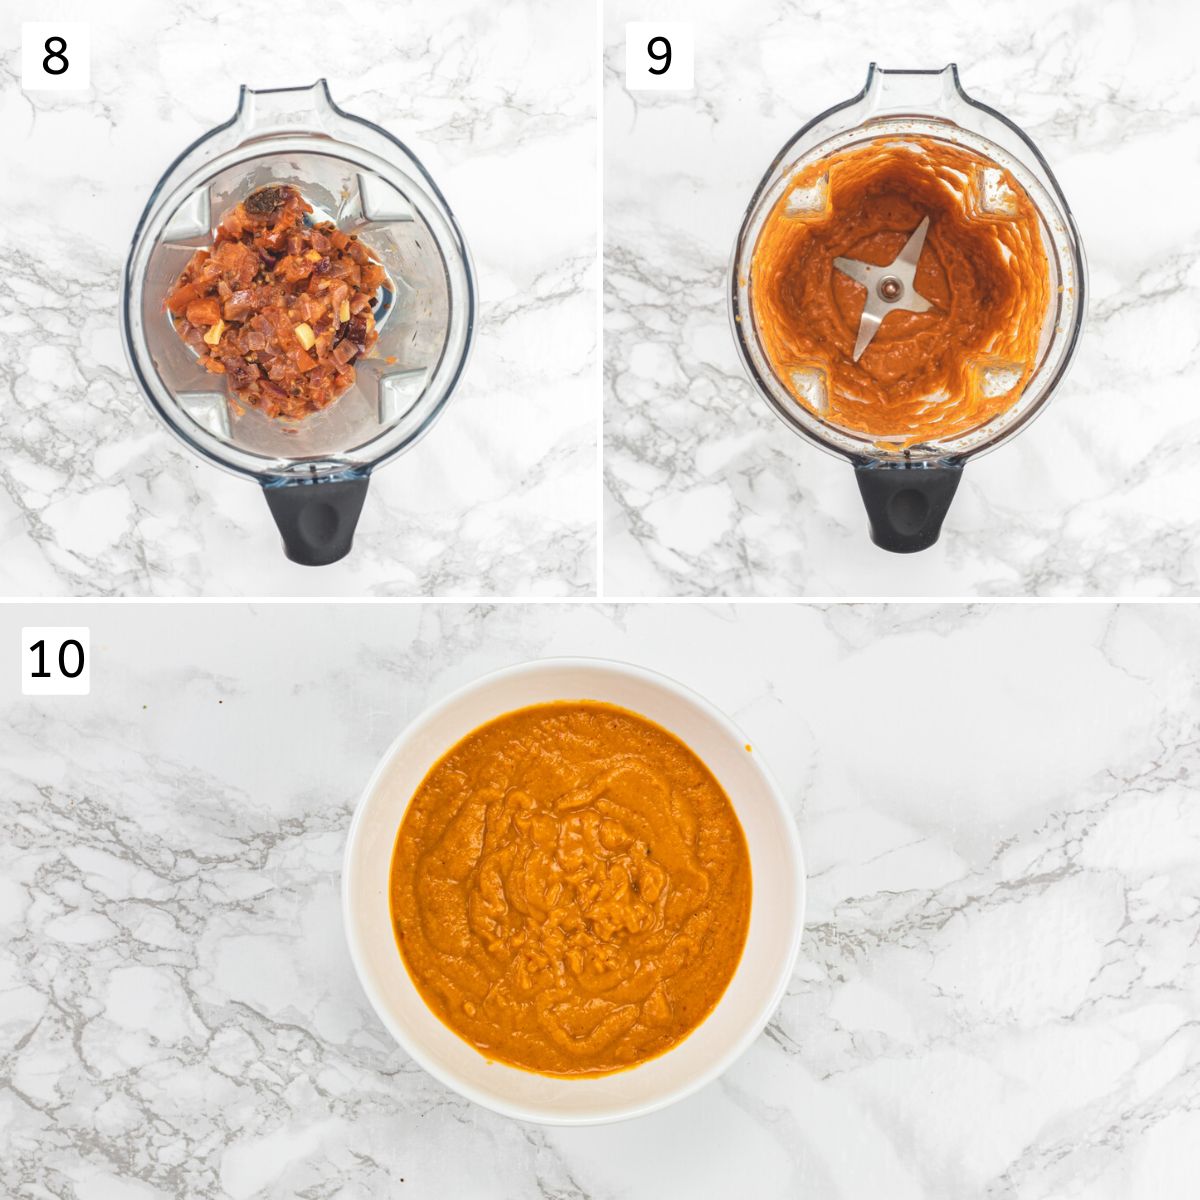 Collage of 3 images showing cooked mixtute in a blender and made into paste, removed to a bowl.